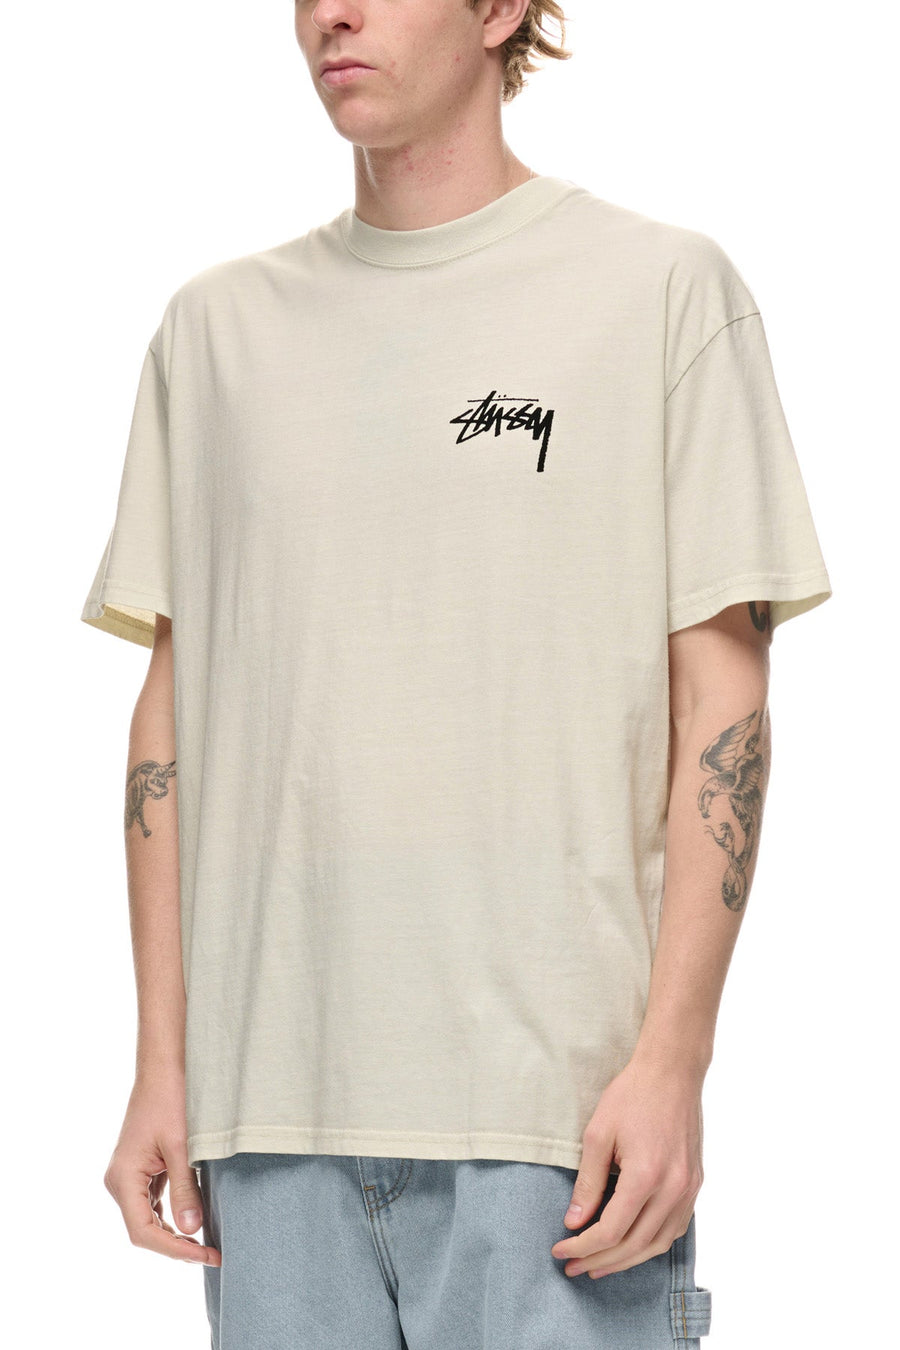 STUSSY S TALK SS TEE - PIGMENT WASHED WHITE - WILDROSE